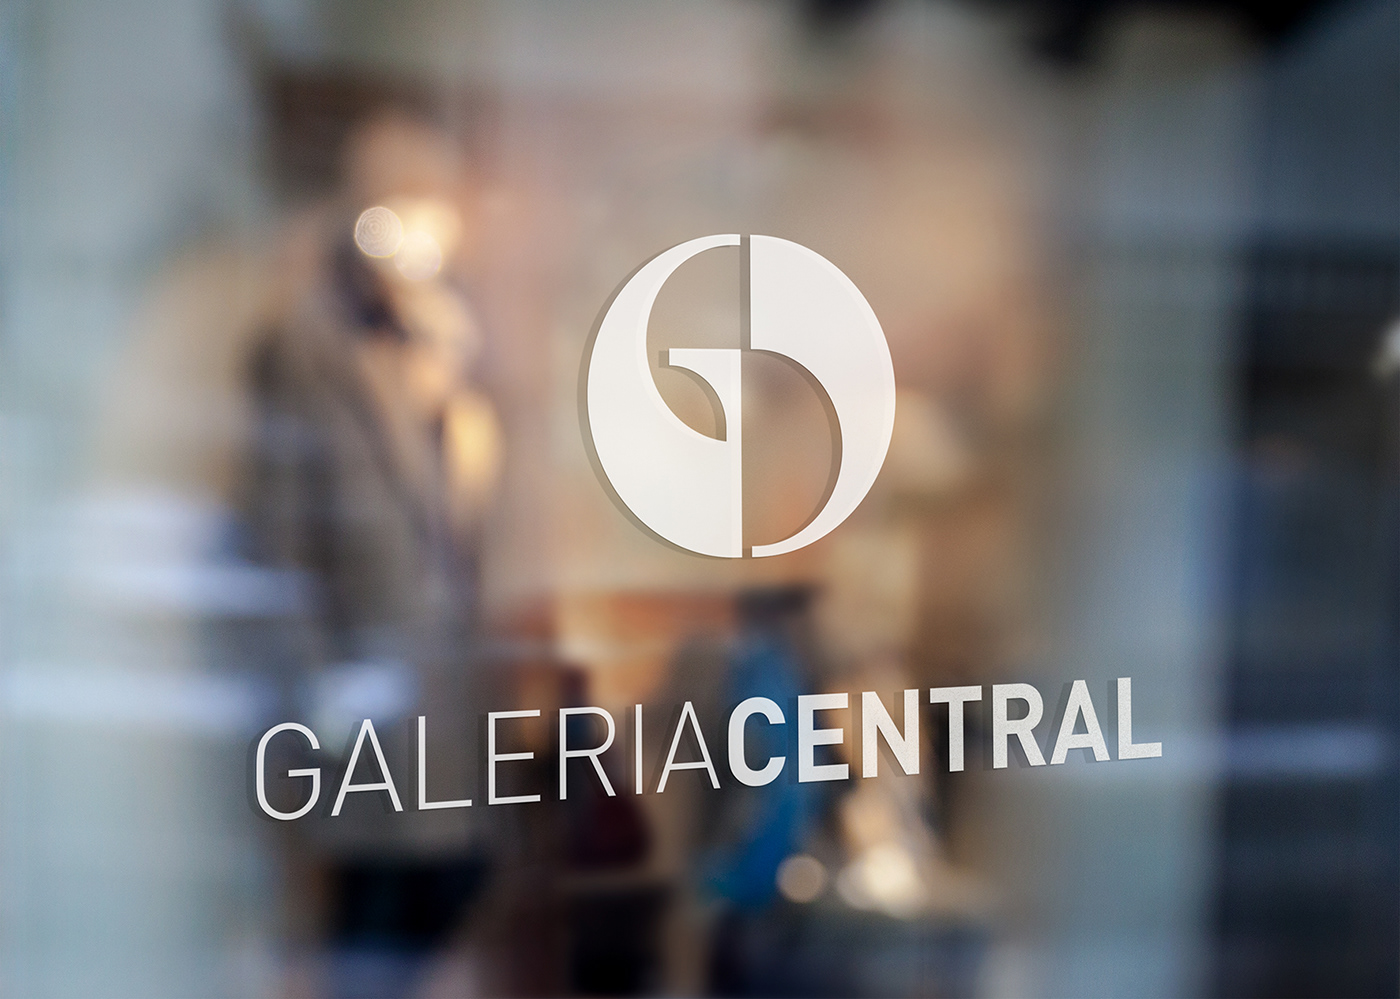 central design galeria gallery logo paraguay Technology